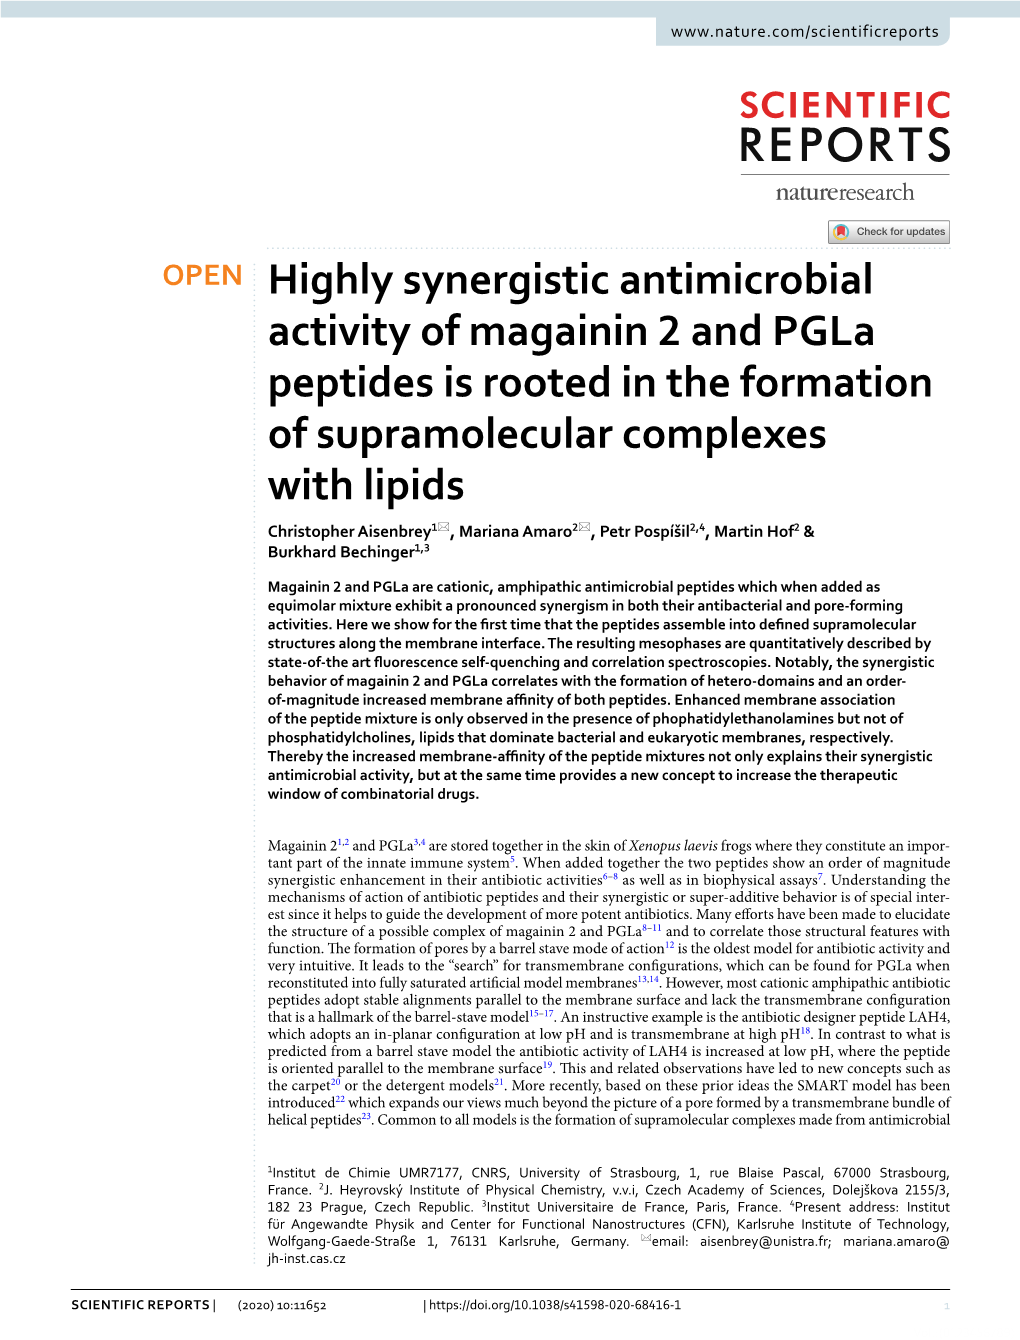 Highly Synergistic Antimicrobial Activity of Magainin 2 and Pgla Peptides Is Rooted in the Formation of Supramolecular Complexes